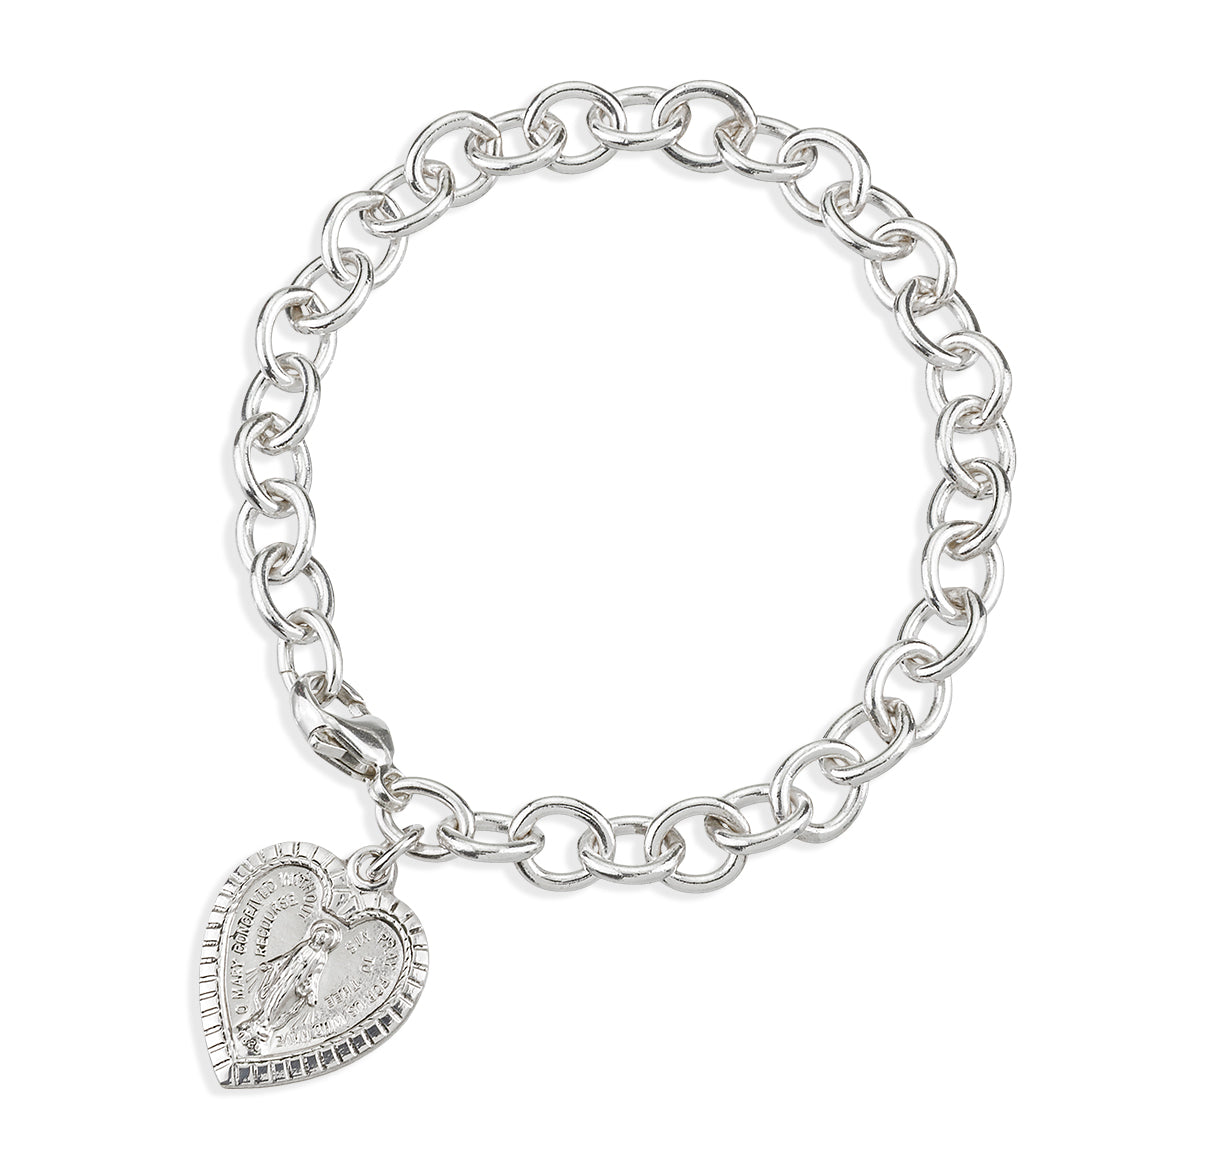 Solid Sterling Silver Linked Bracelet with Heart Shape Miraculous Medal Charm